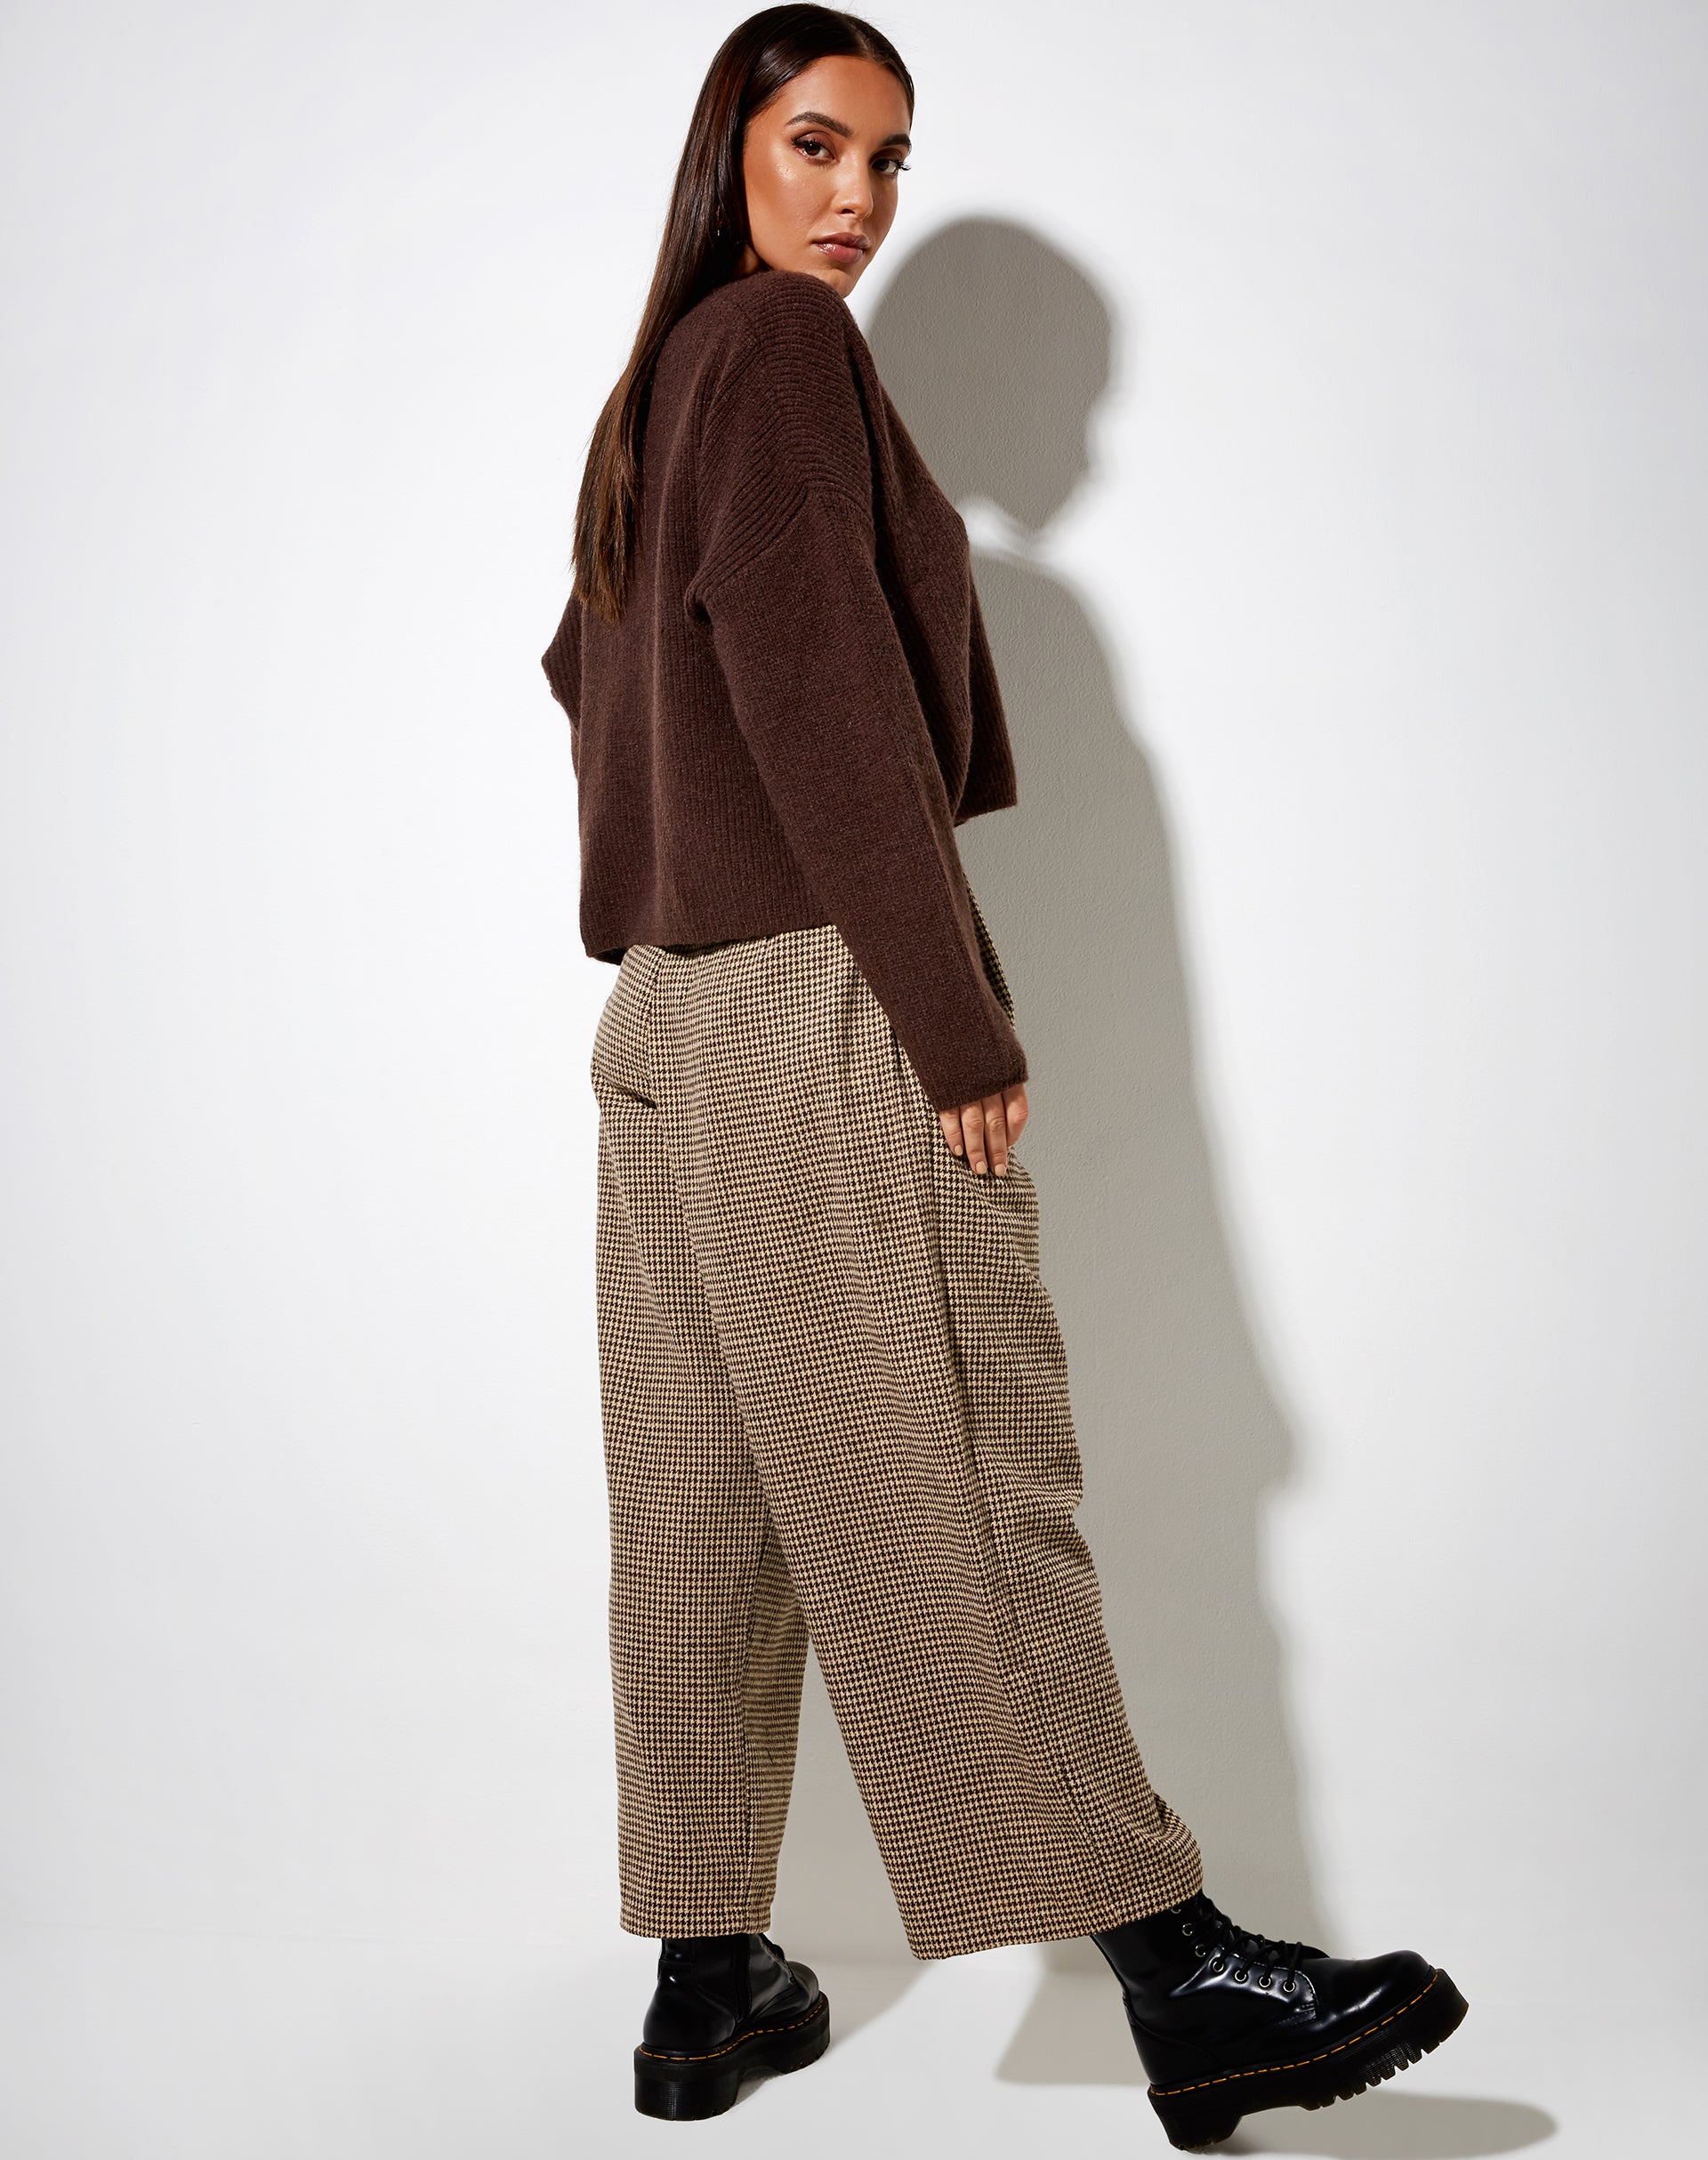 Image of Mabel Jumper in Knit Choco Brown